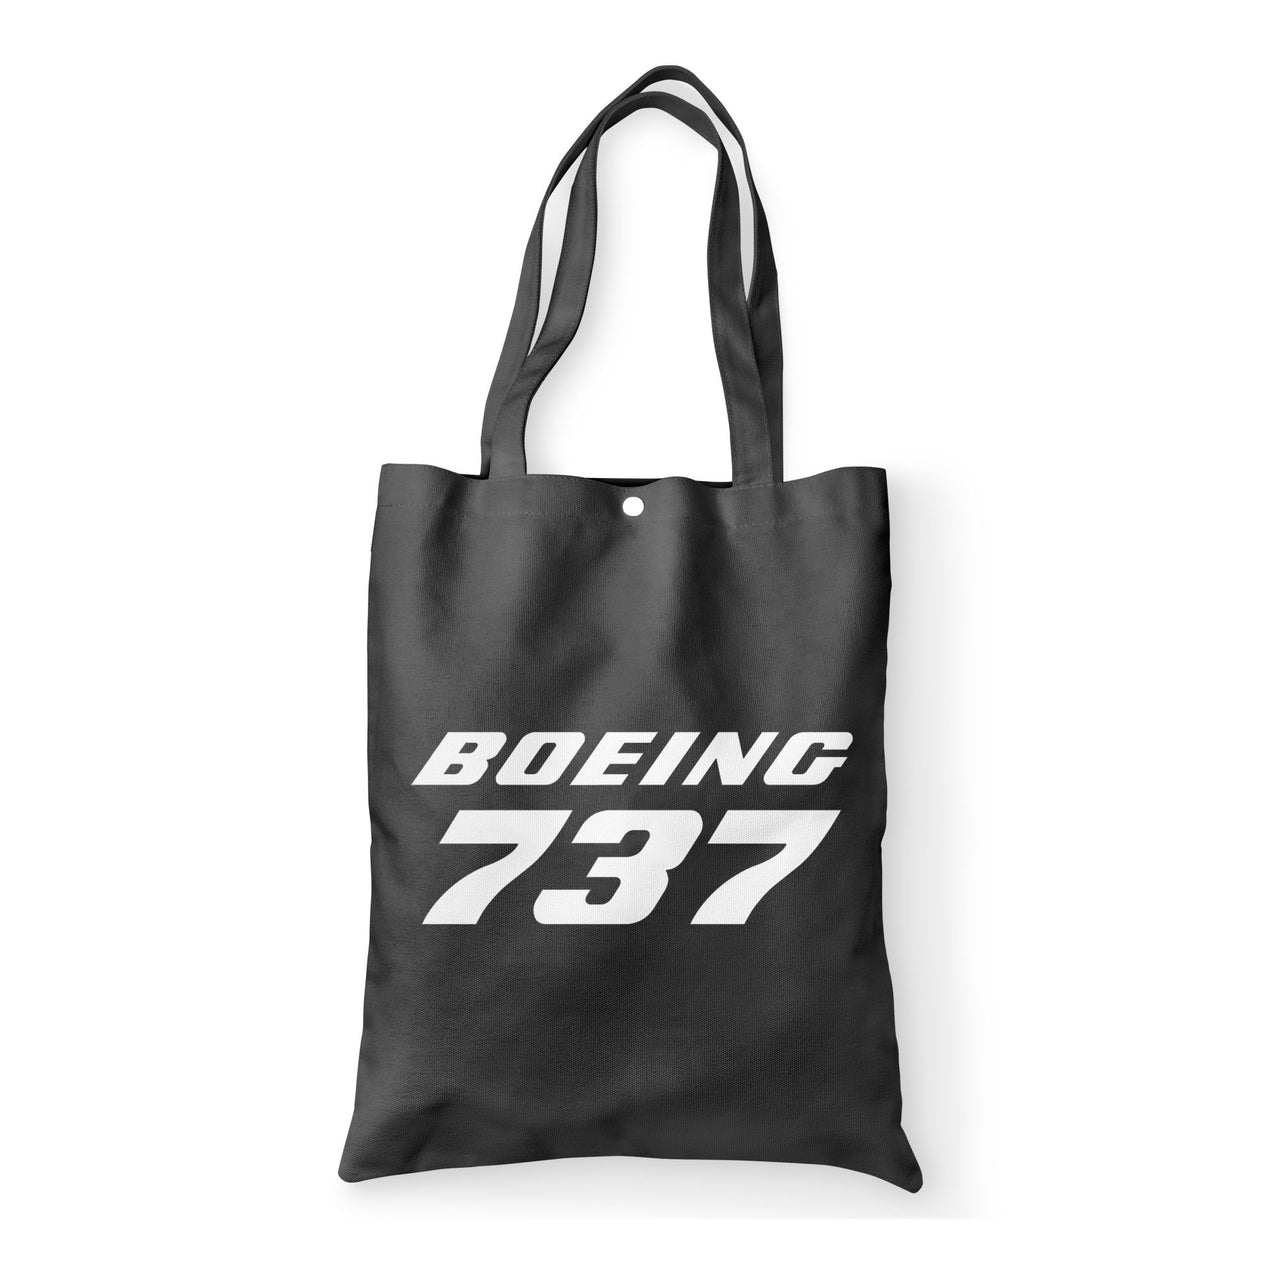 Boeing 737 & Text Designed Tote Bags